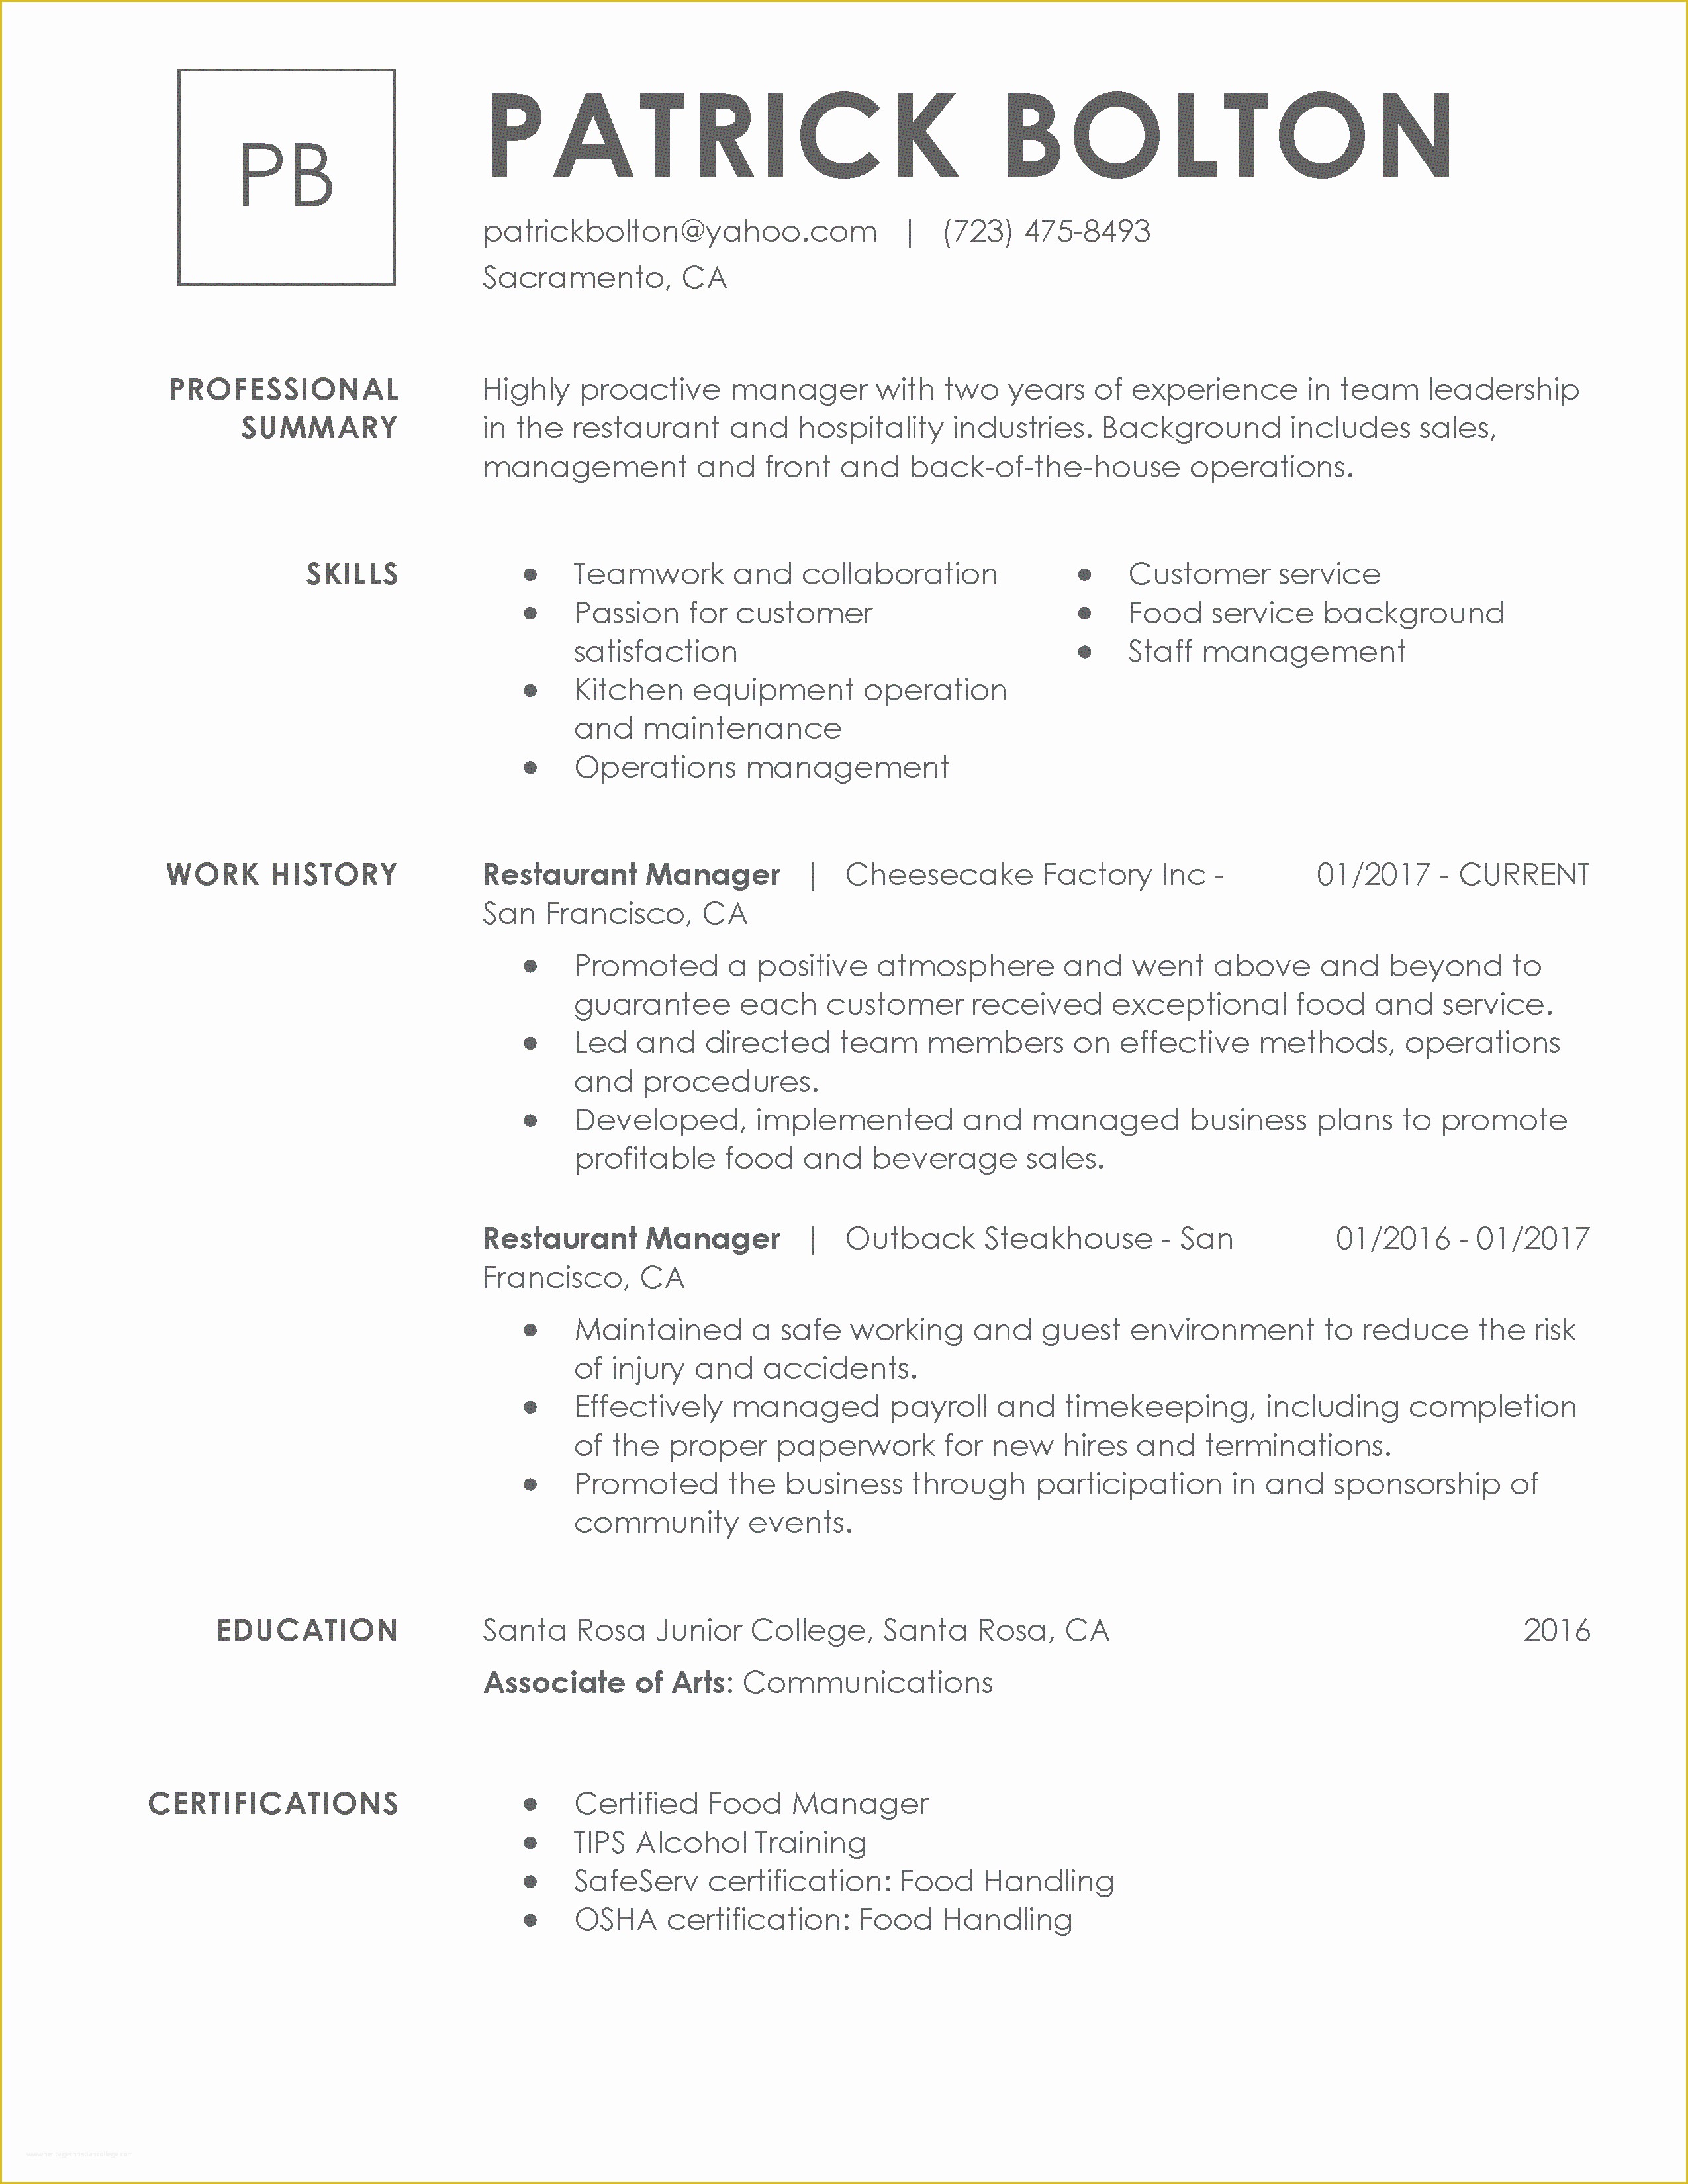 Free Job Specific Resume Templates Of Free Resume Examples by Industry &amp; Job Title